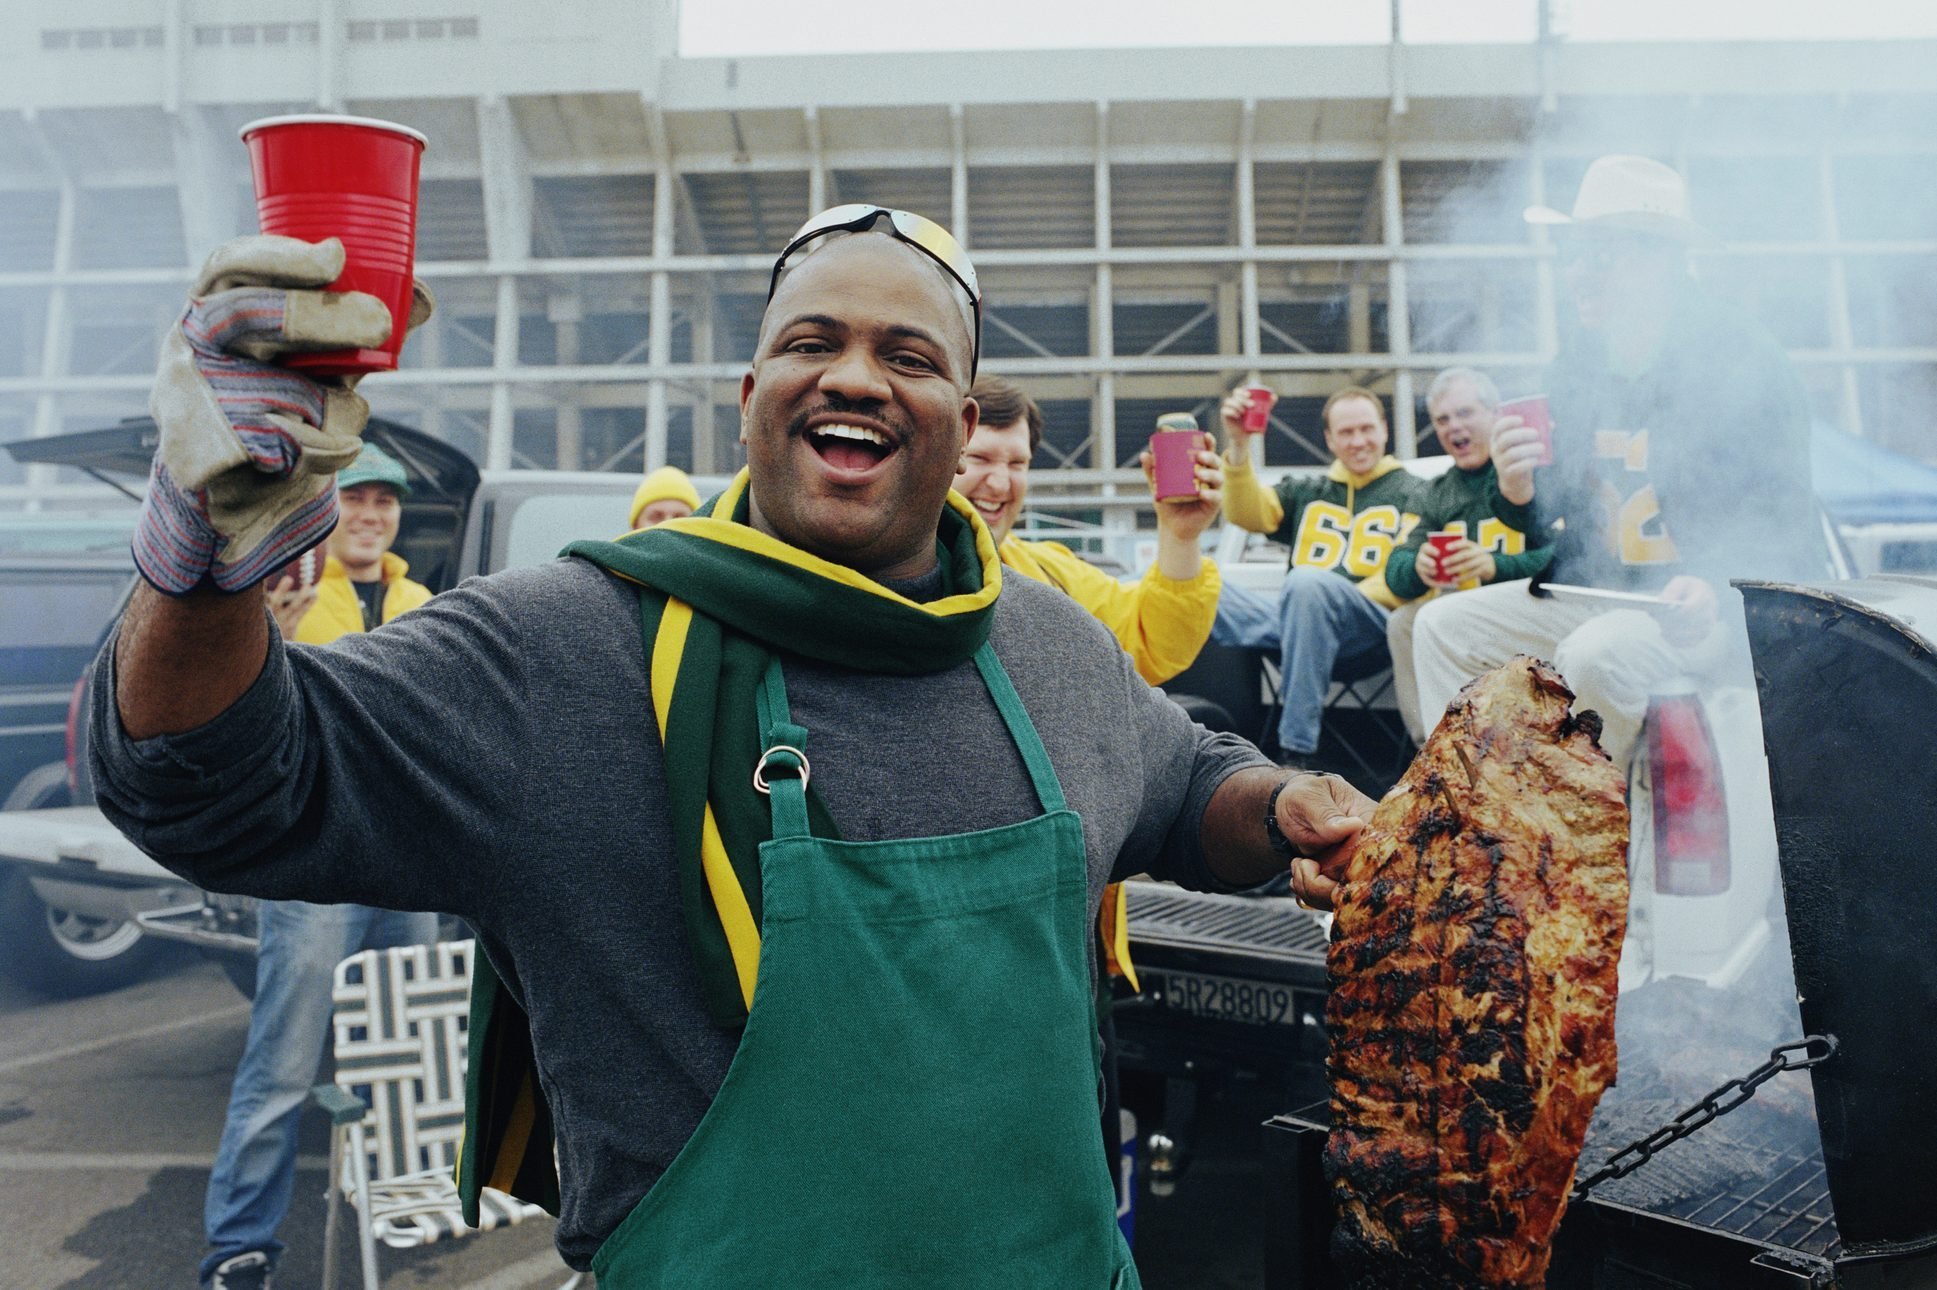 Food Safety Tips for Your Next Tailgate, From a Microbiology Expert